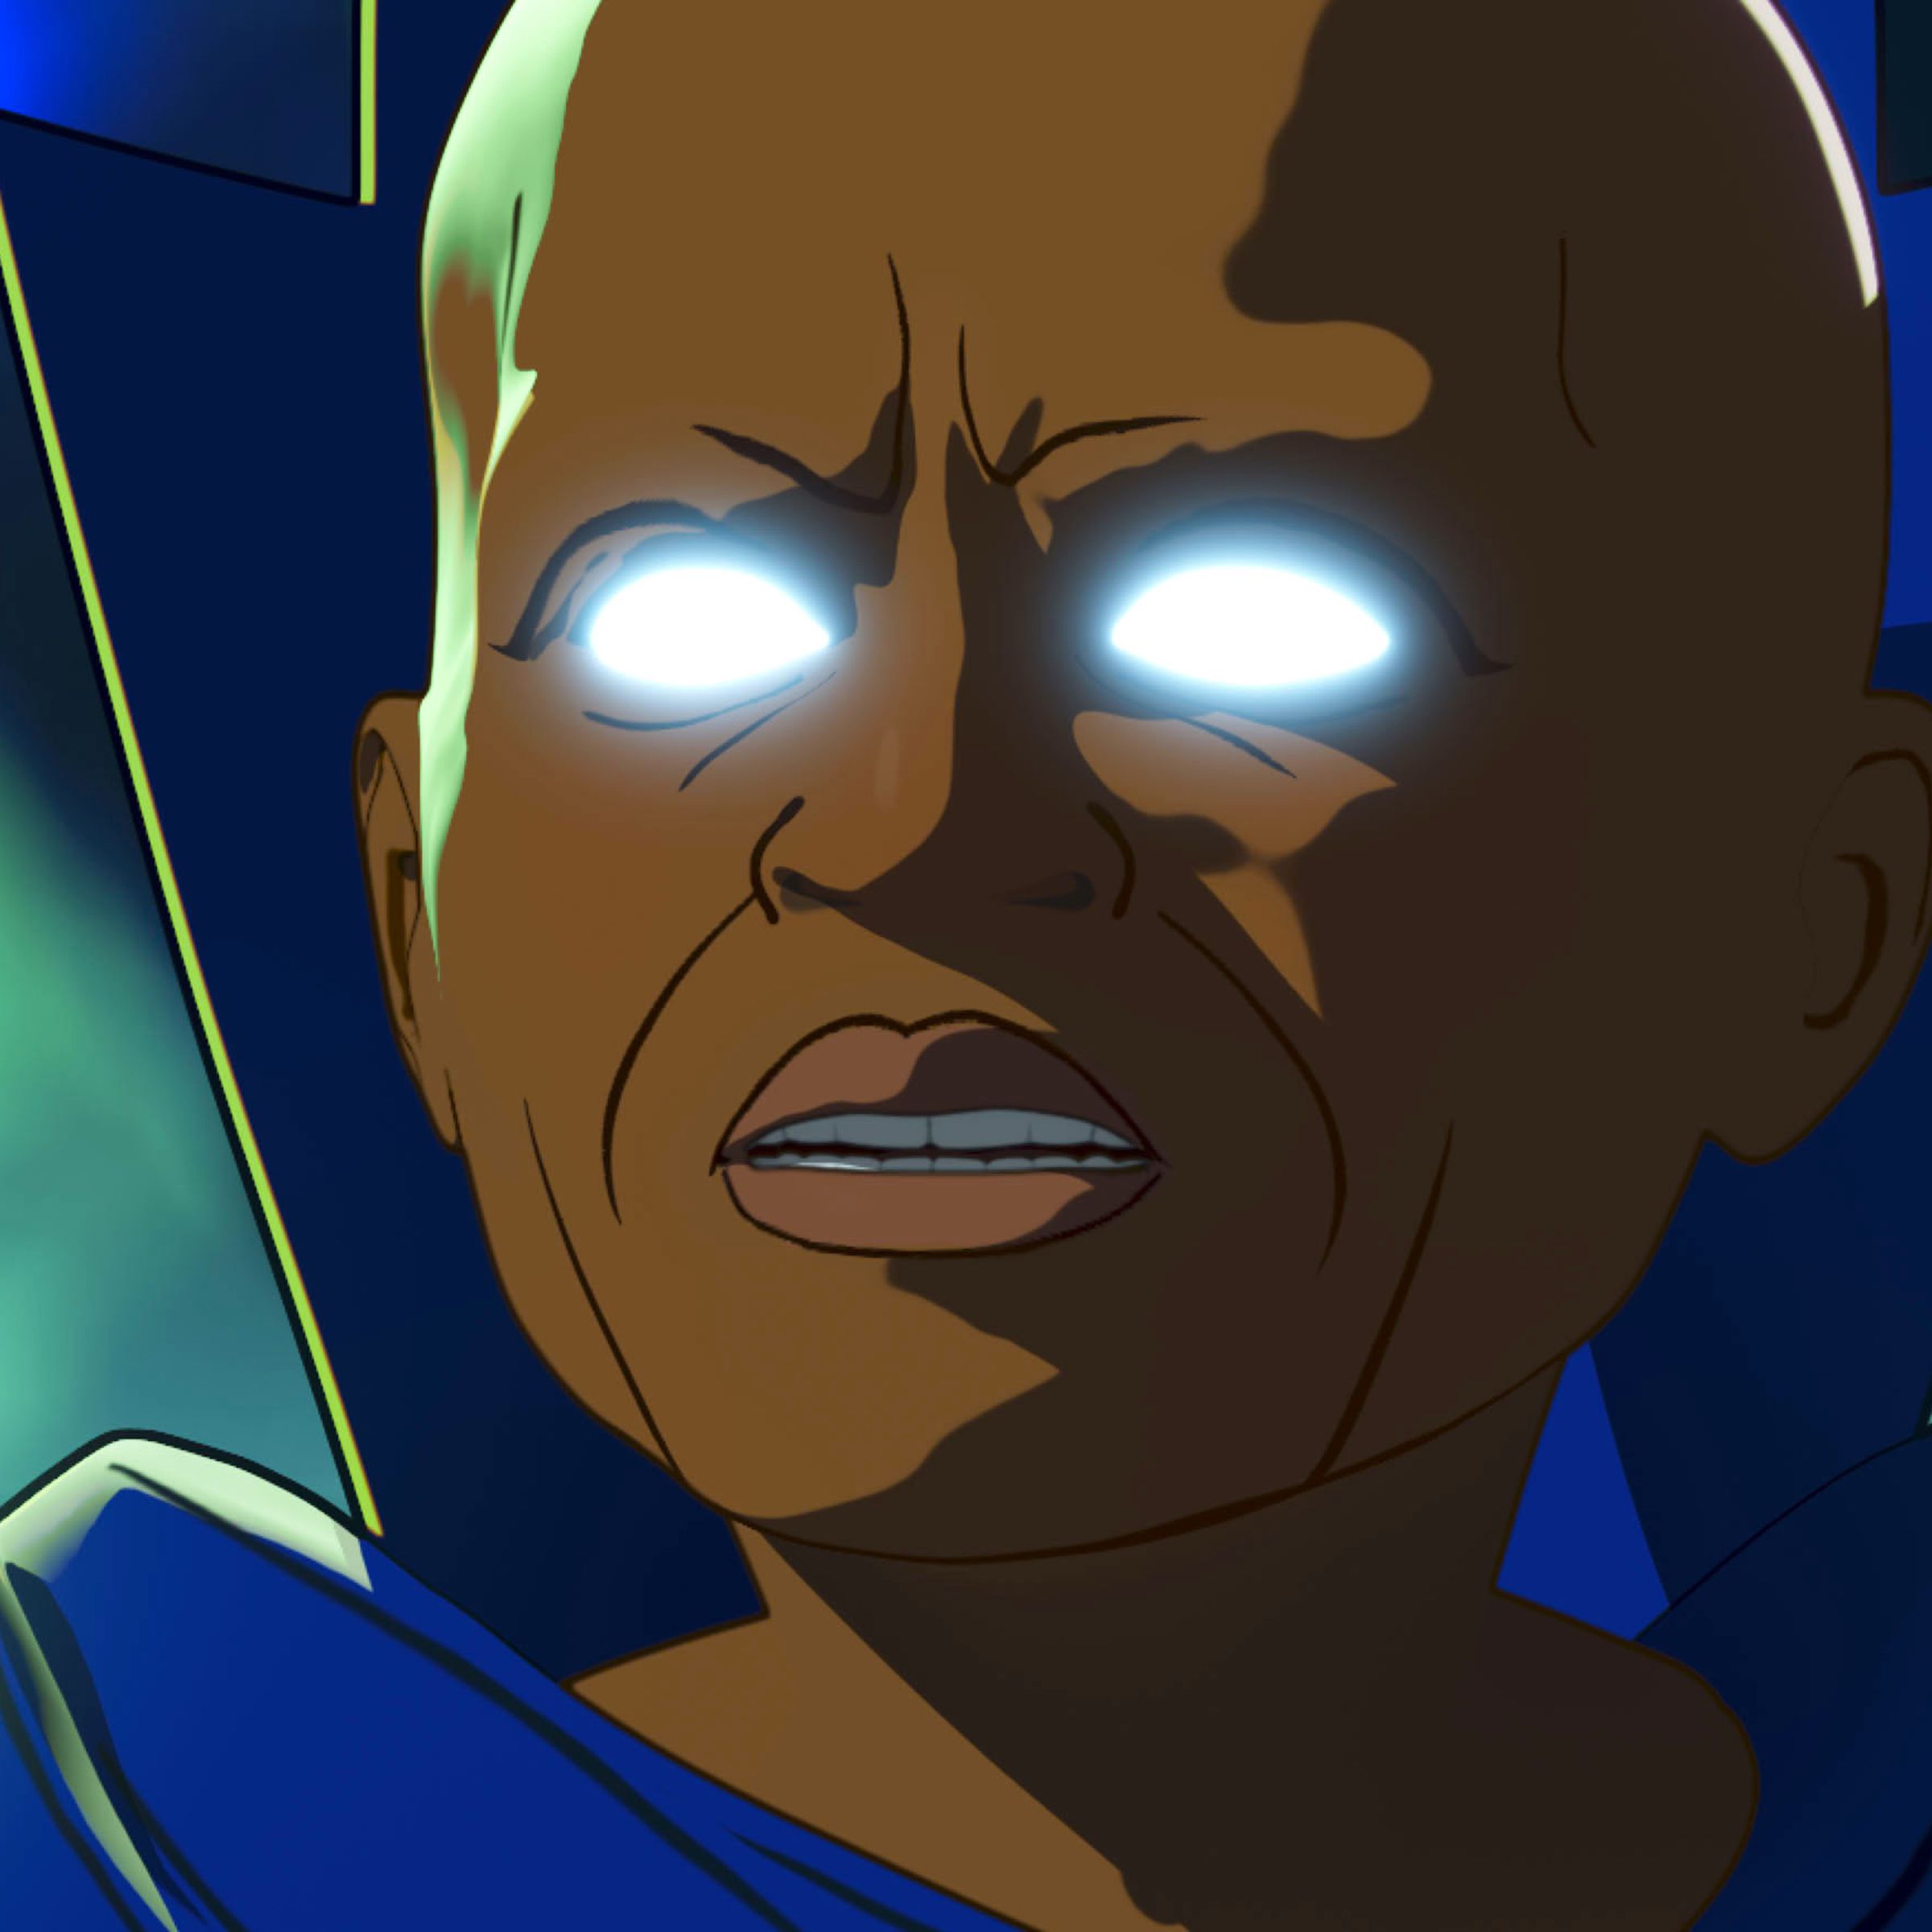 A bald man with a massive forehead wearing a high-necked cape.